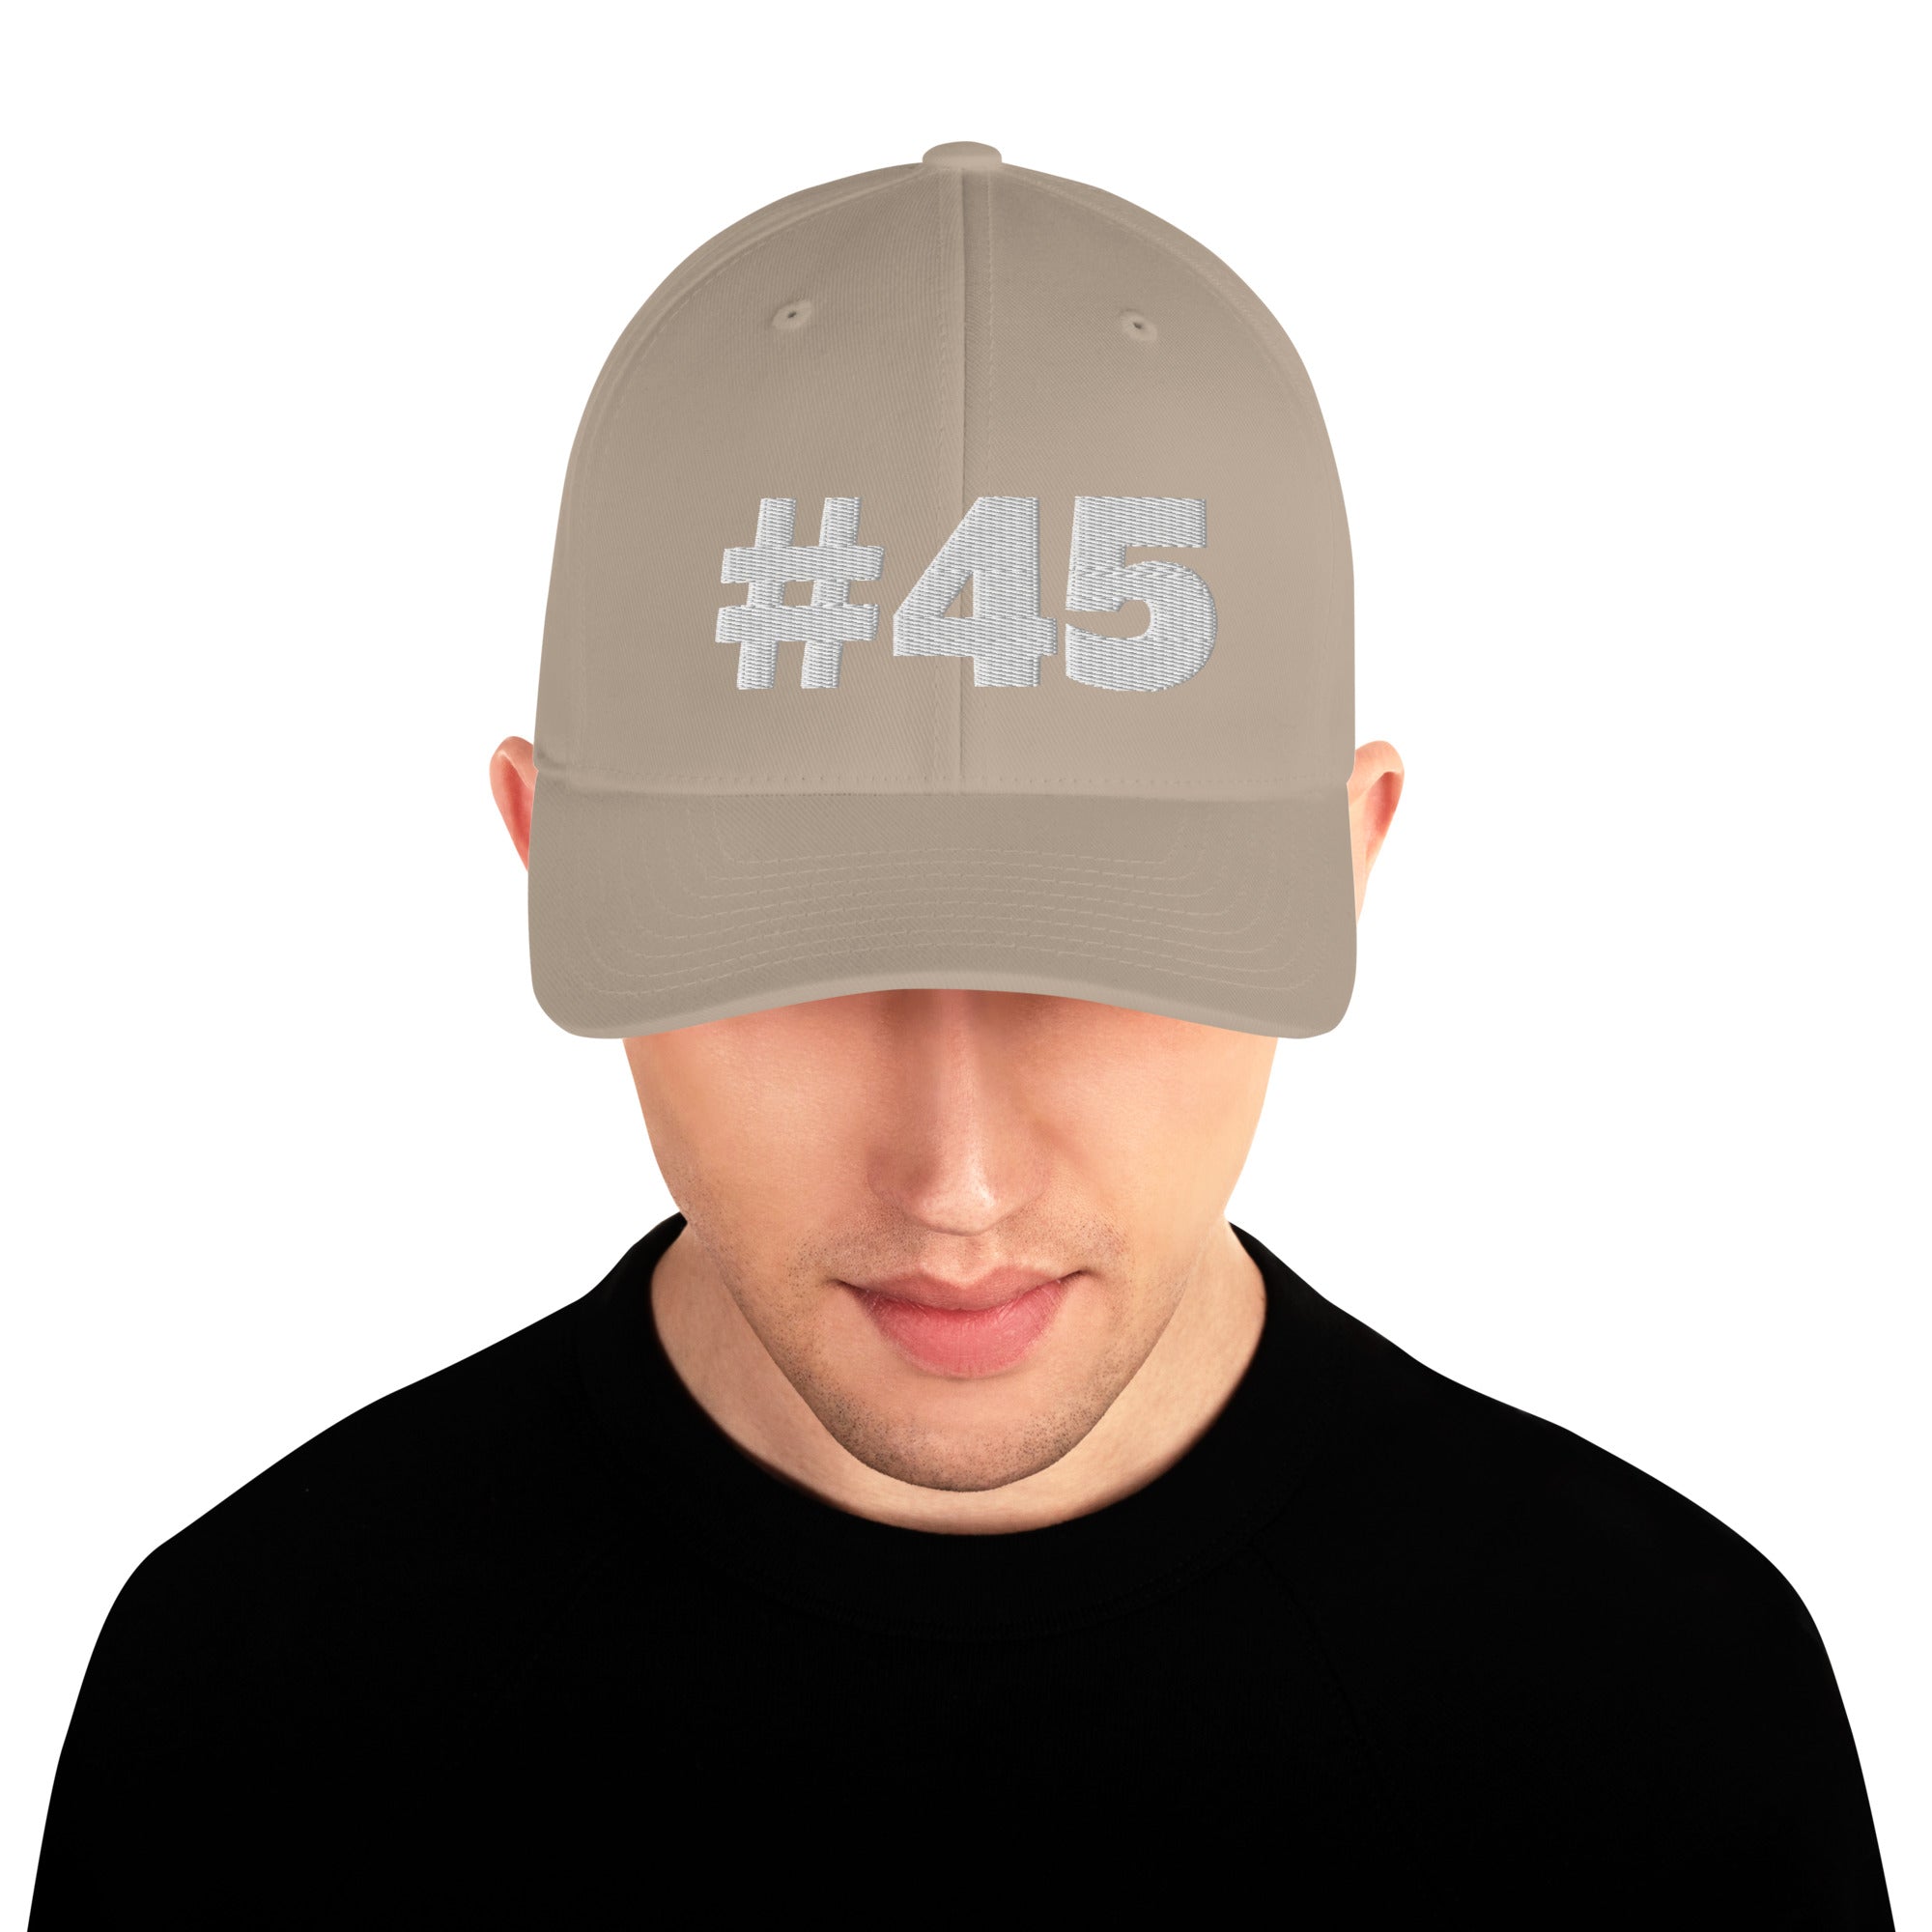 Fitted #45 Structured Twill Cap